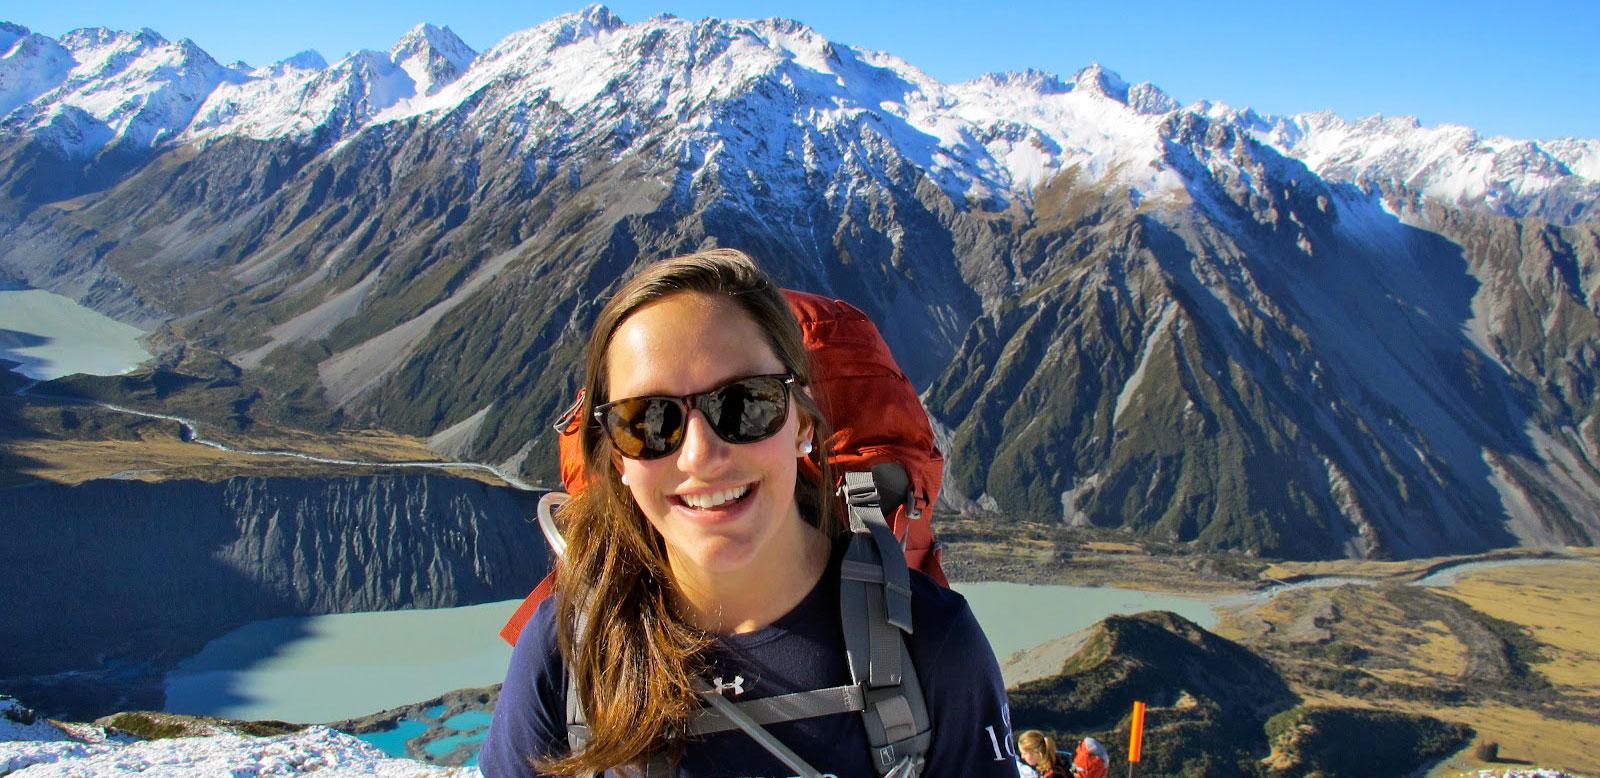 Hiking high in the Southern Alps in Mt Cook National Park.